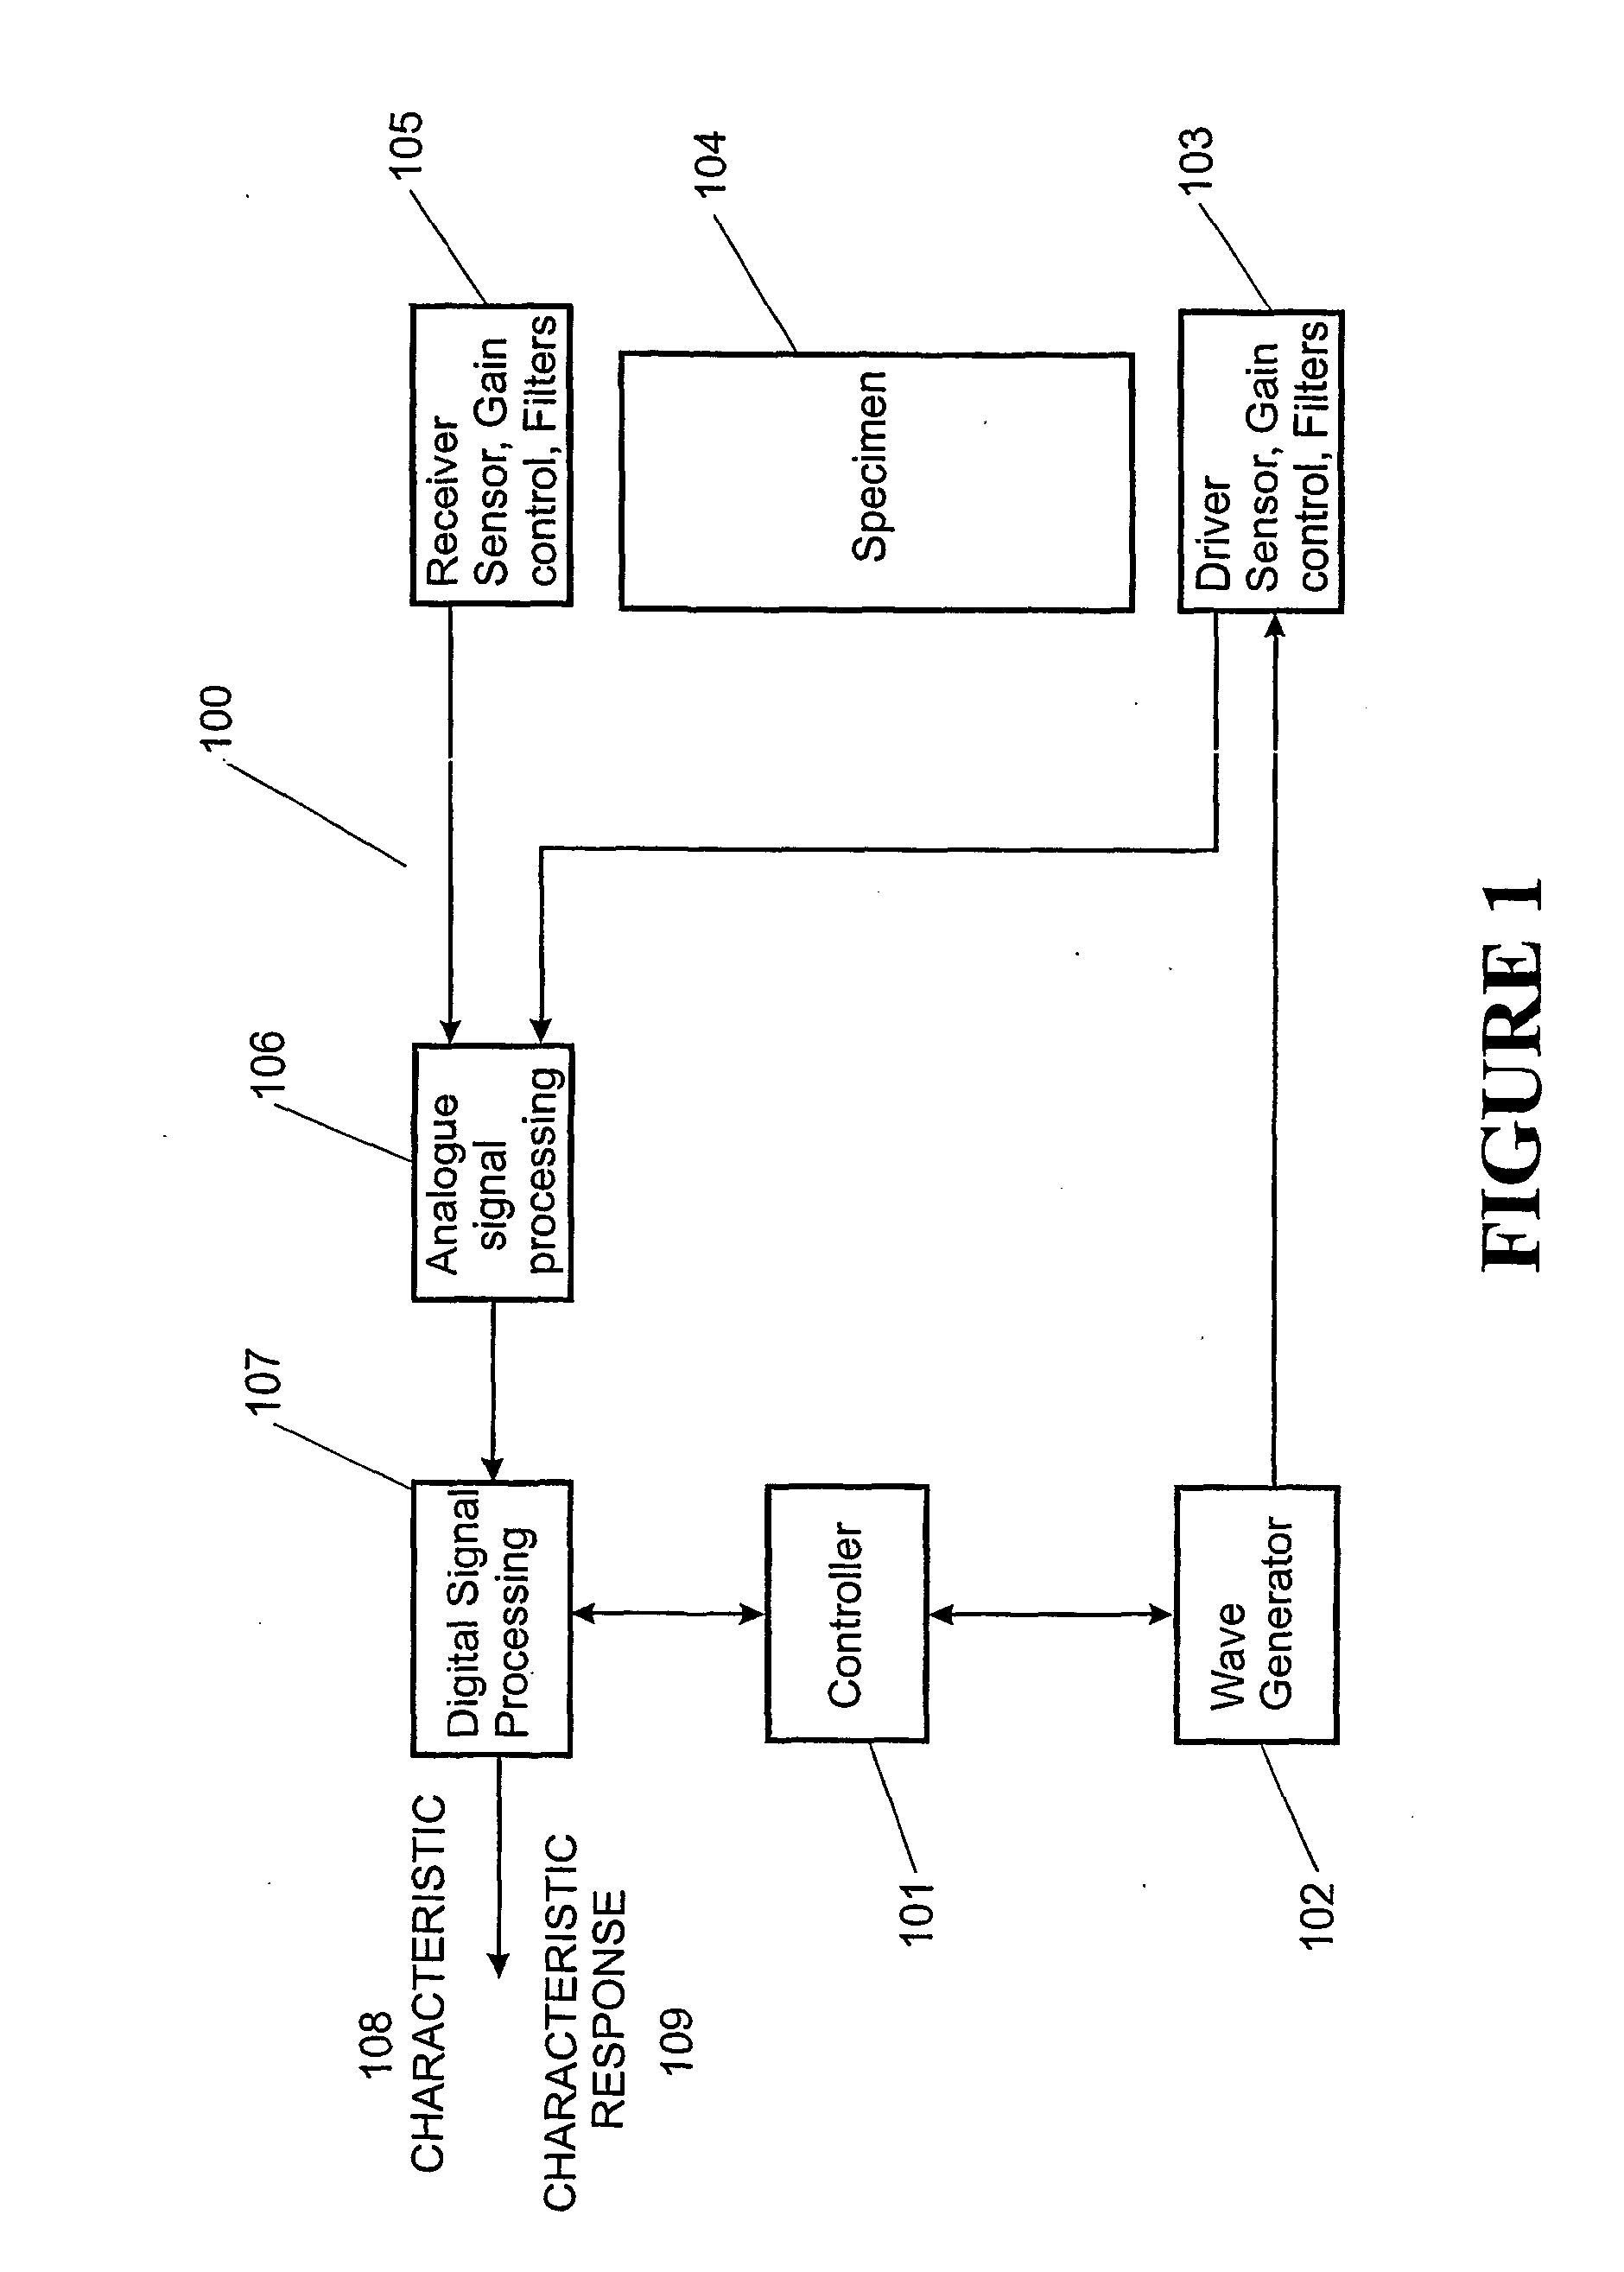 Method and apparatus for assessing or predicting characteristics of wood or other wooden materials